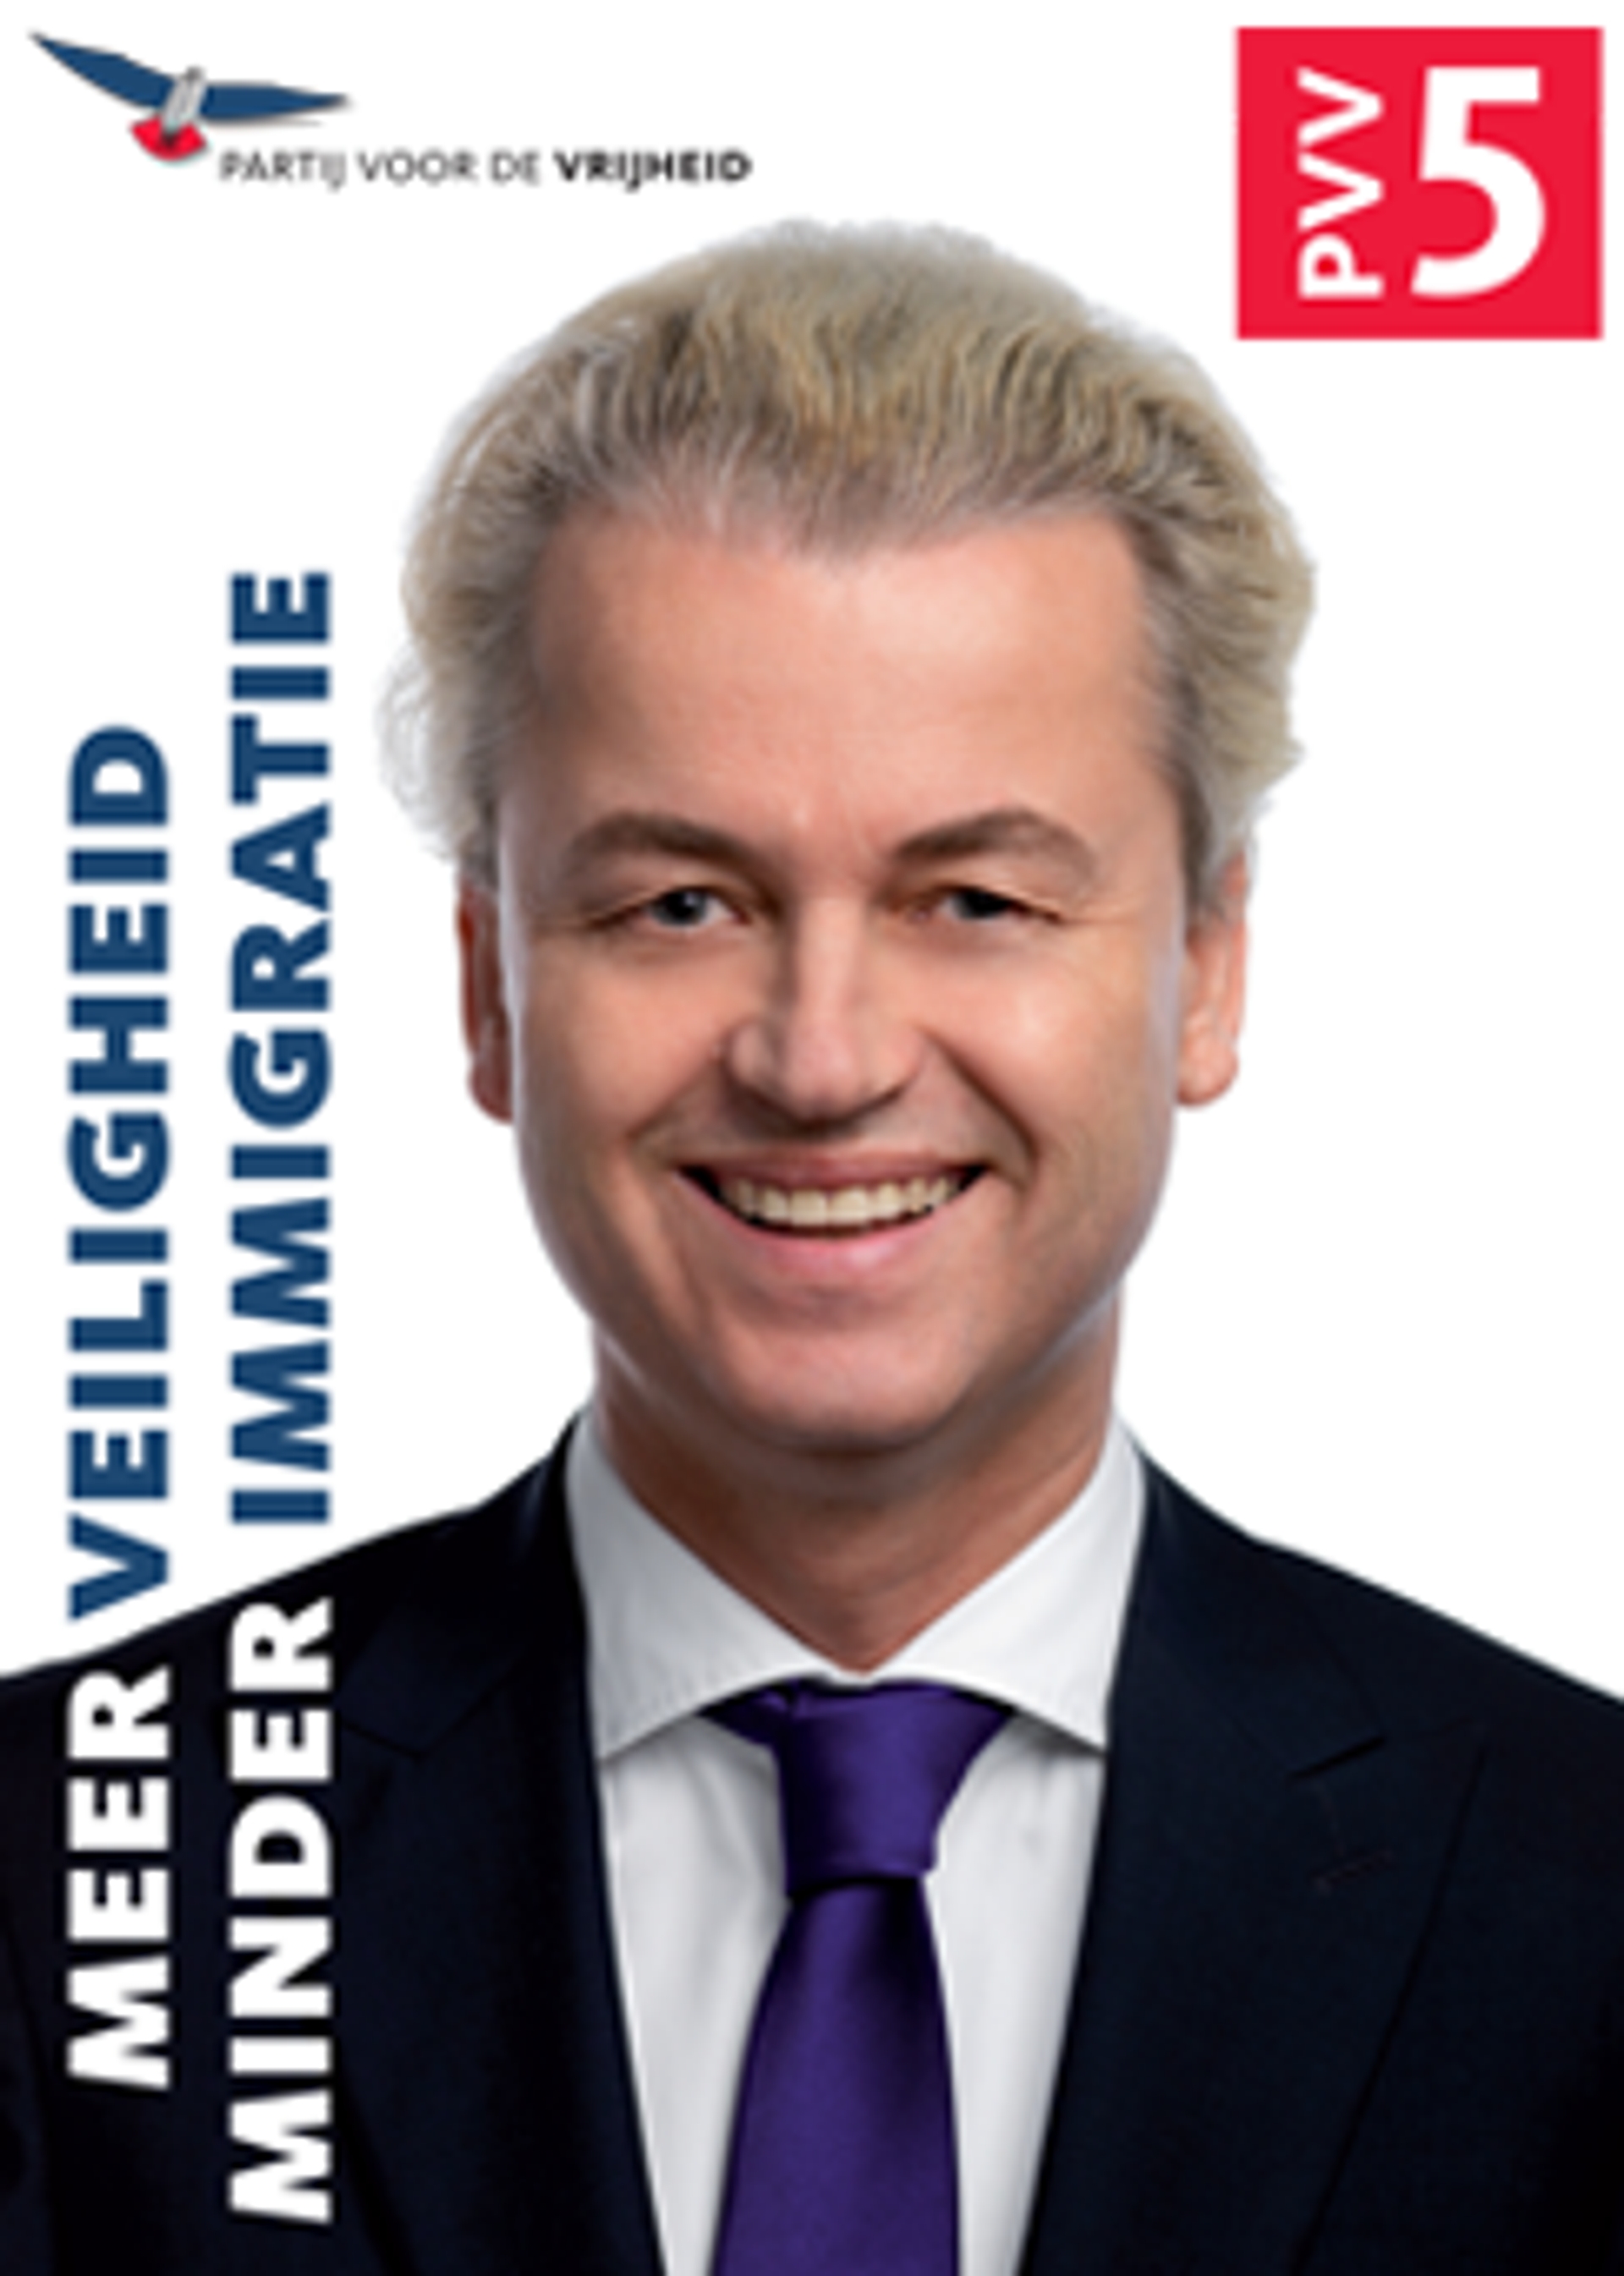 RTEmagicC_PVV-poster2010.png